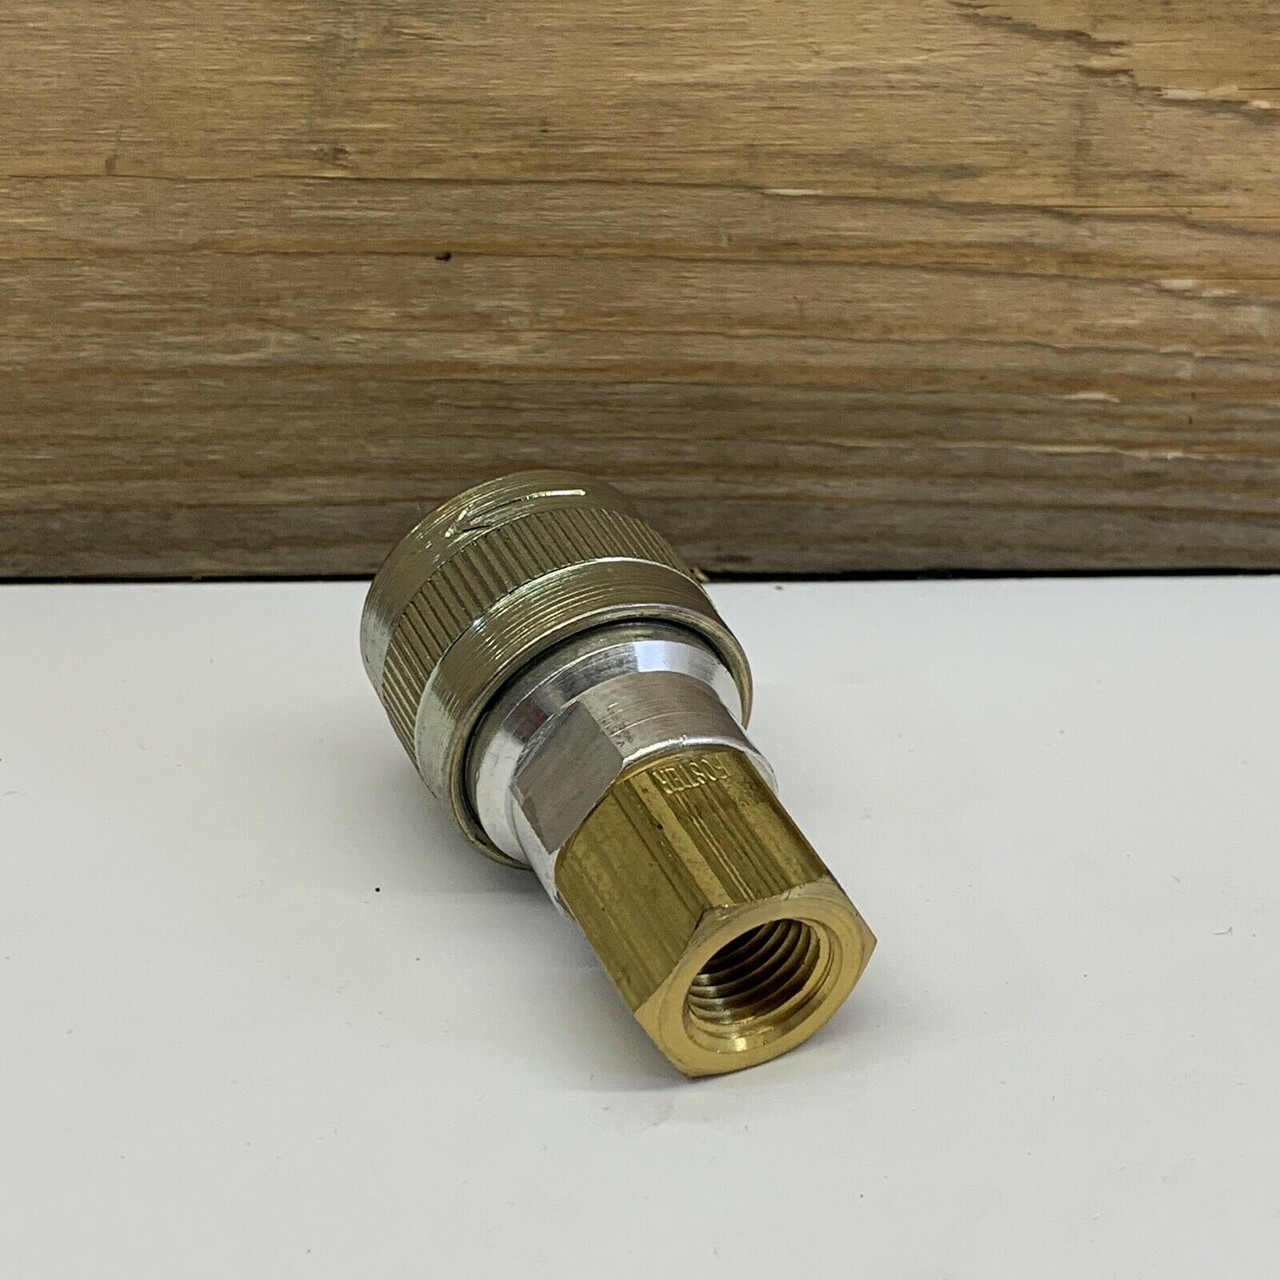 Quick Disconnect Coupling Half SHD3003 Foster Steel 0.25" Thread Size